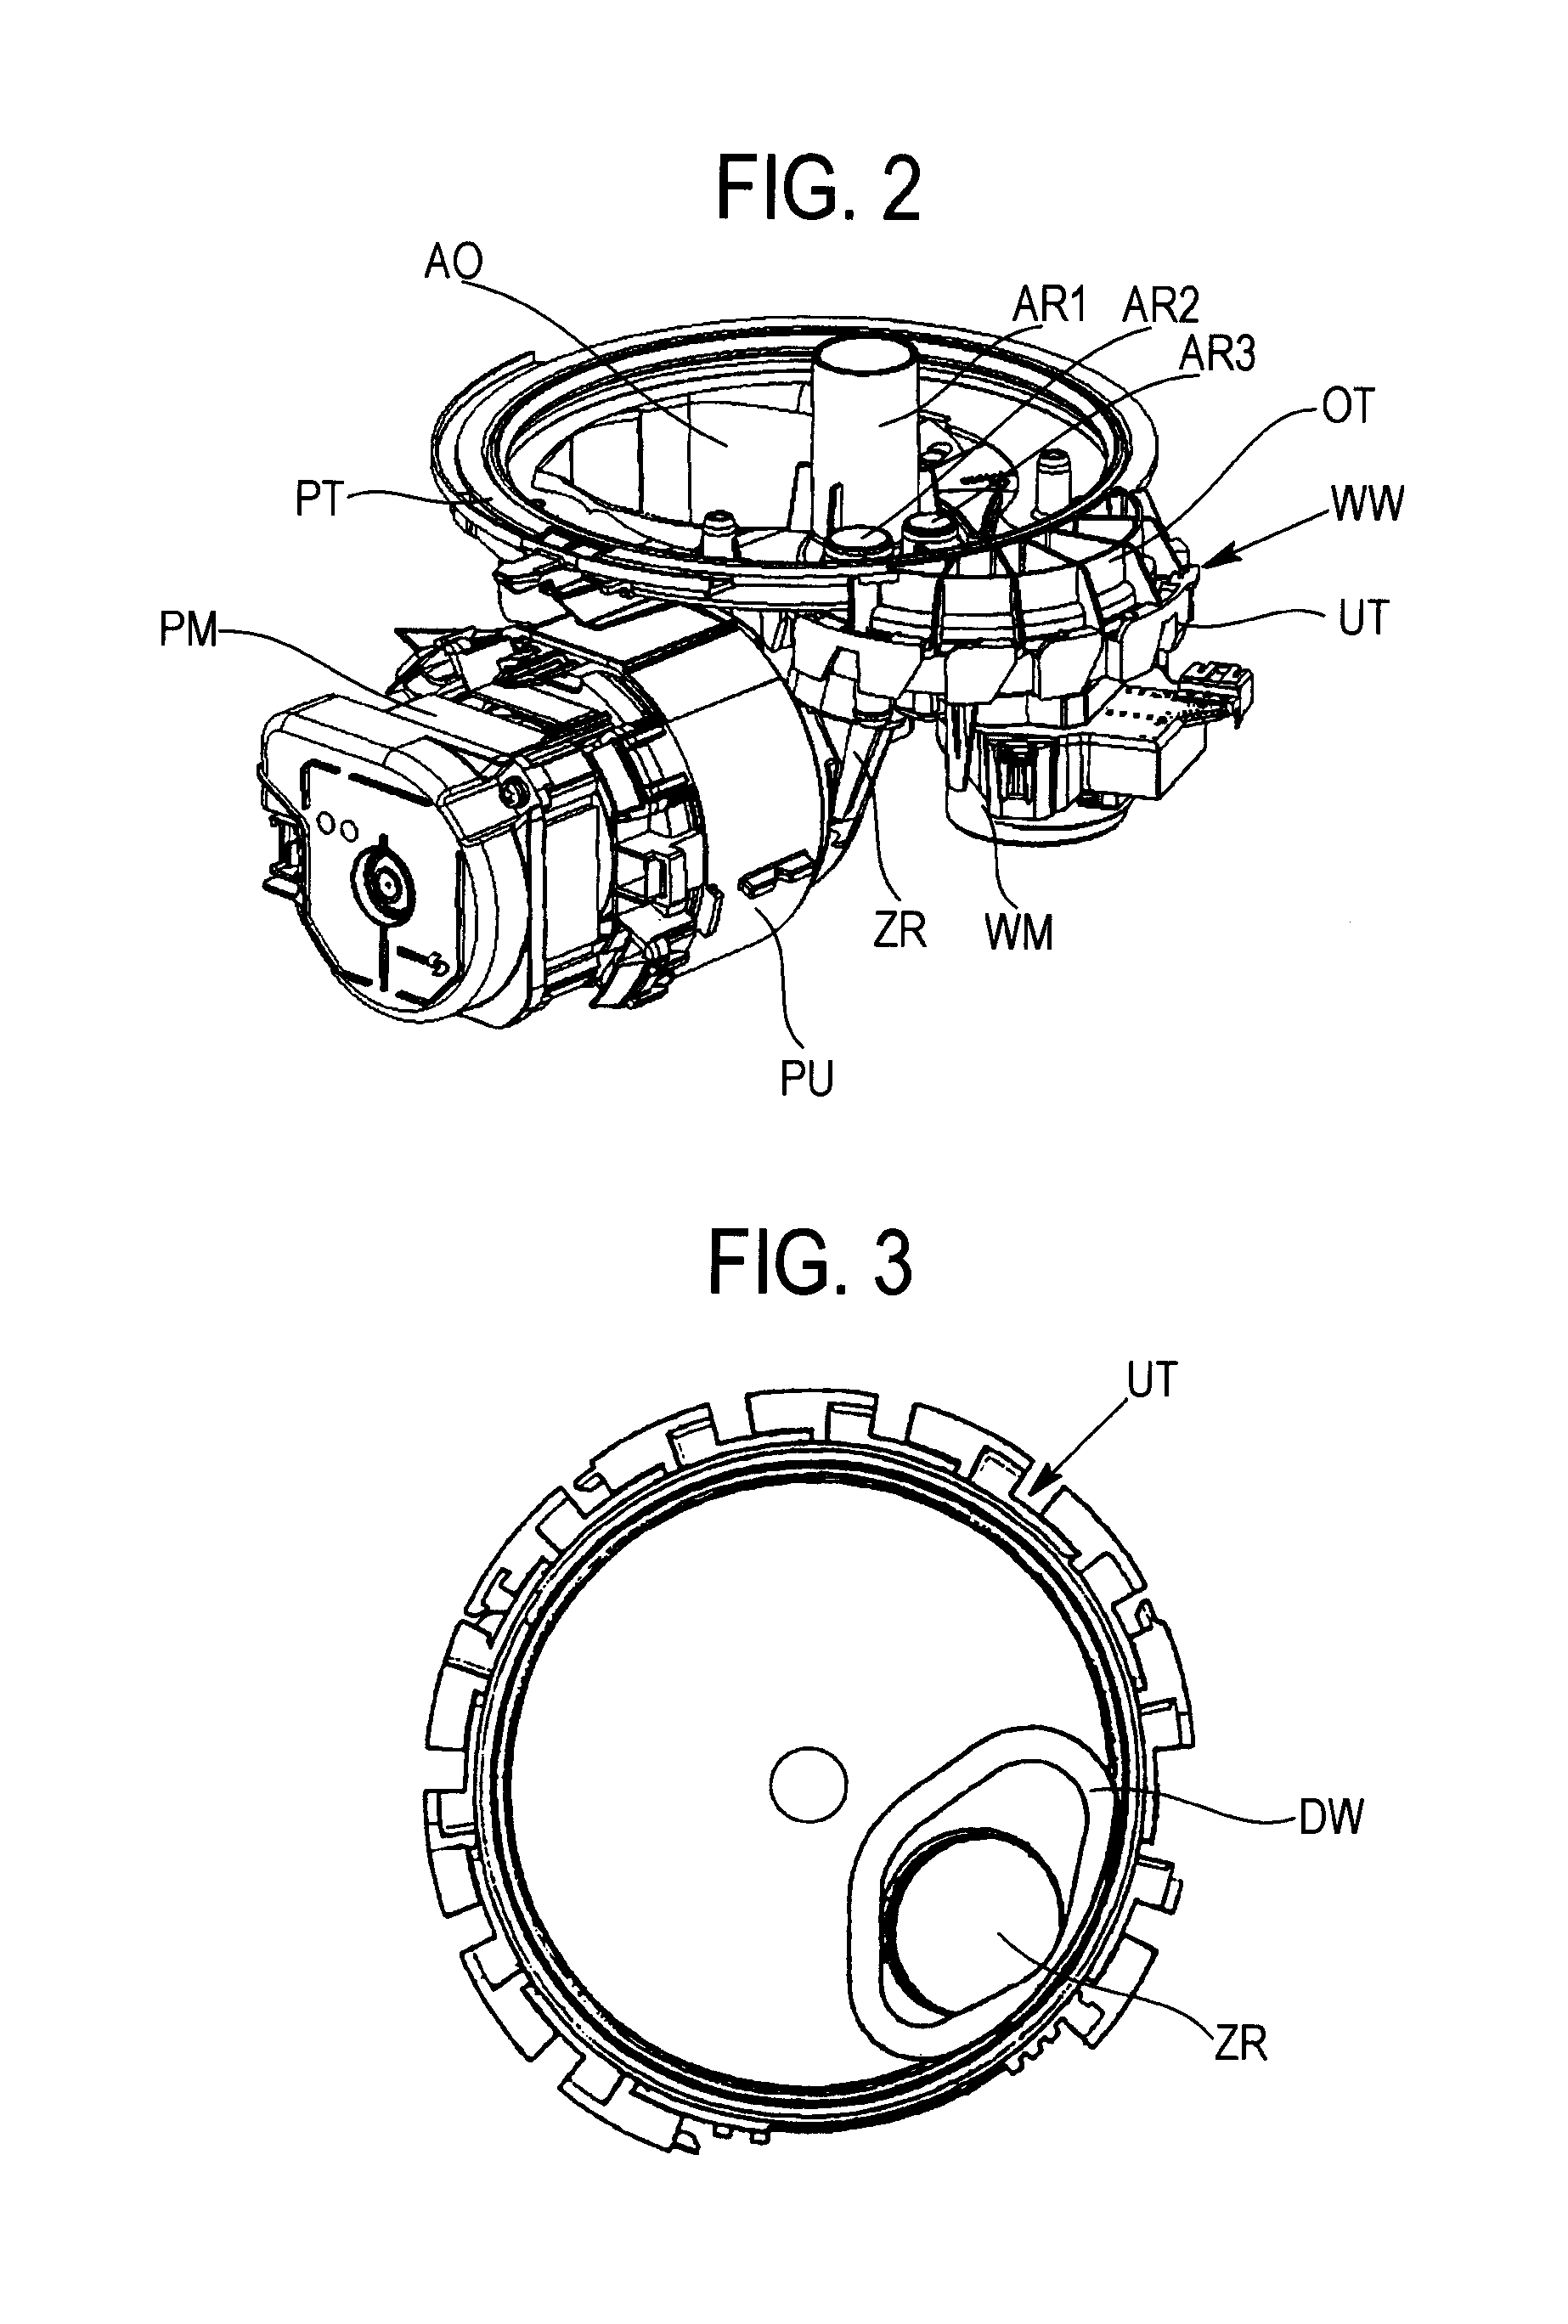 Water-carrying domestic appliance having a water-distribution mechanism